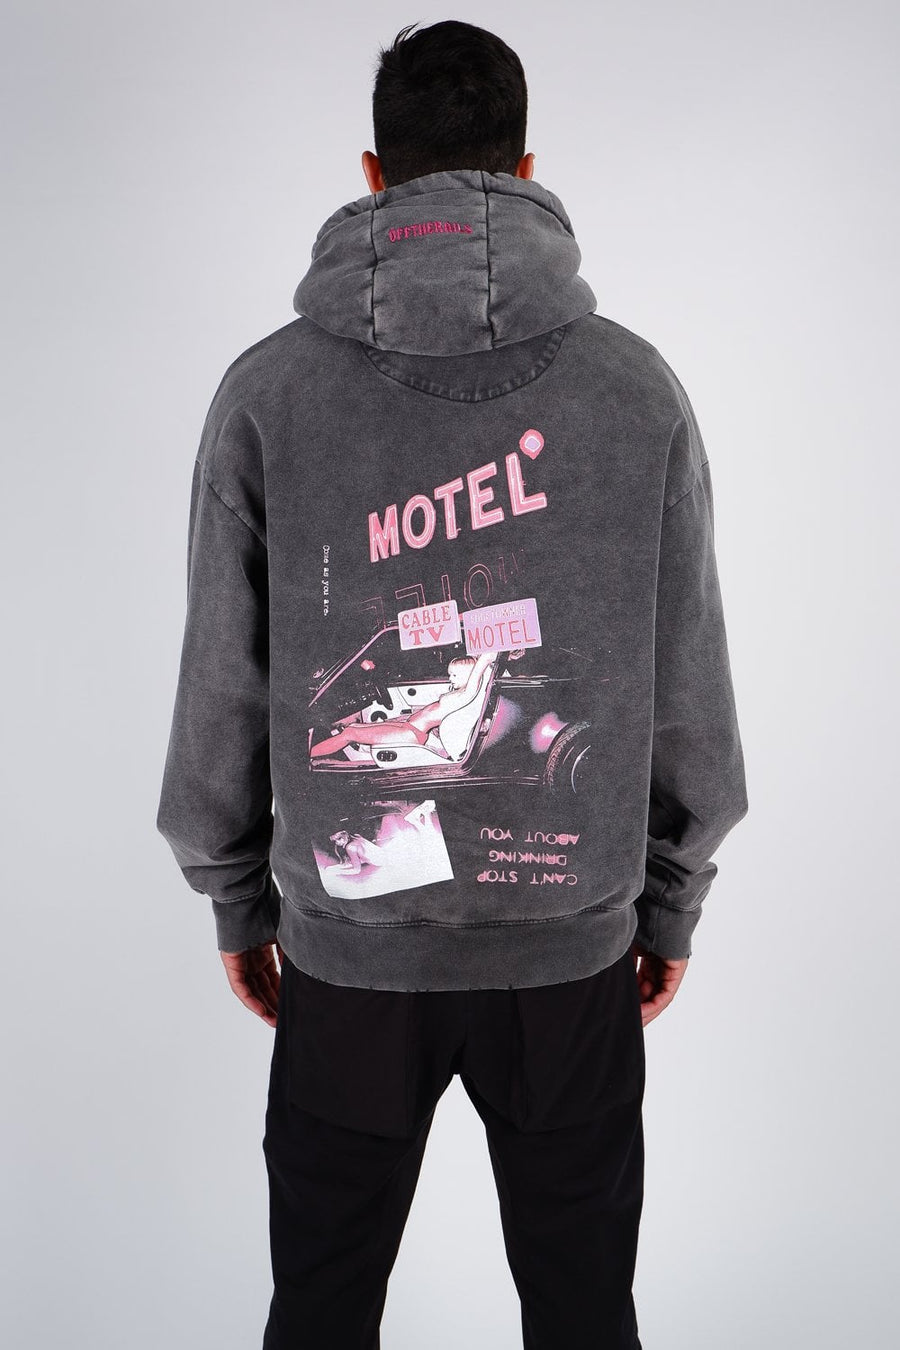 Buy the Off The Rails Motel Vintage Hoodie in Vintage Black at Intro. Spend £50 for free UK delivery. Official stockists. We ship worldwide.